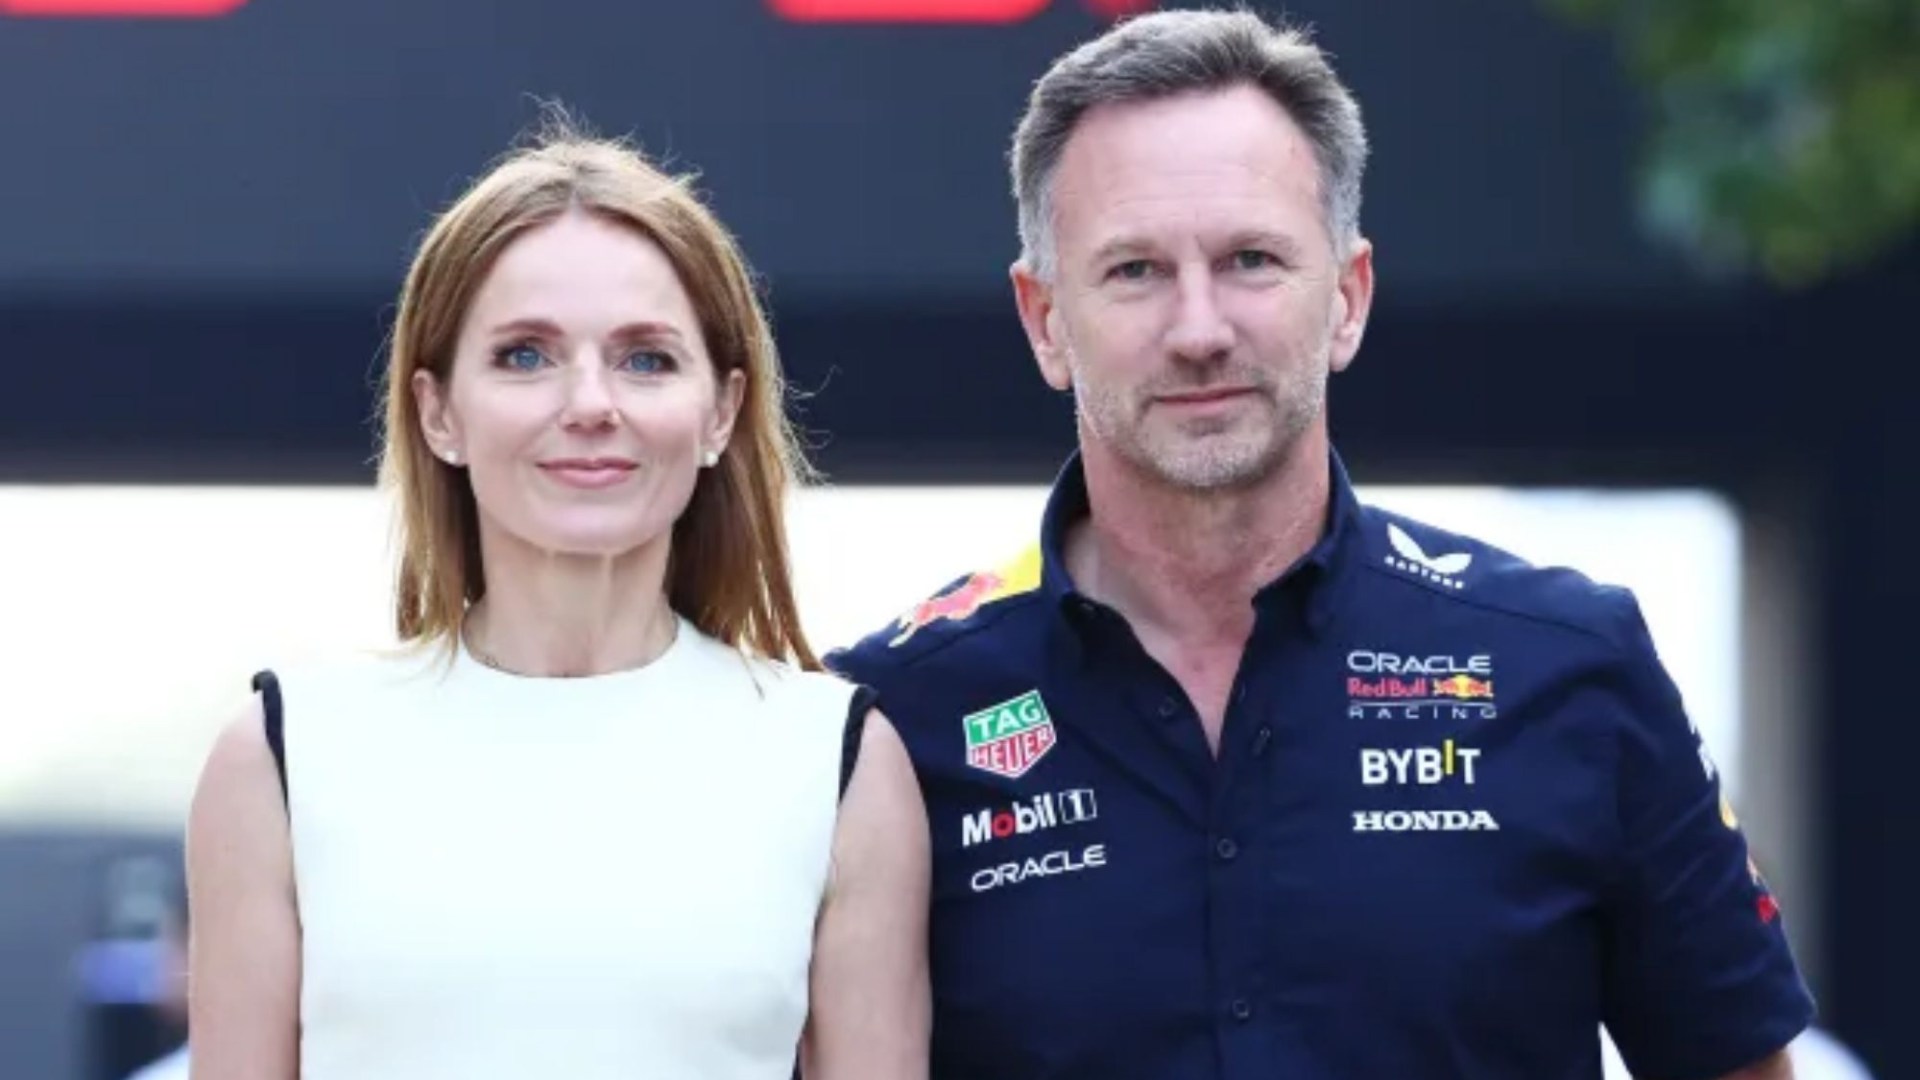 Christian Horner tried to down play sext scandal by telling wife Geri Halliwell that probe was over ‘promotion row’ [Video]